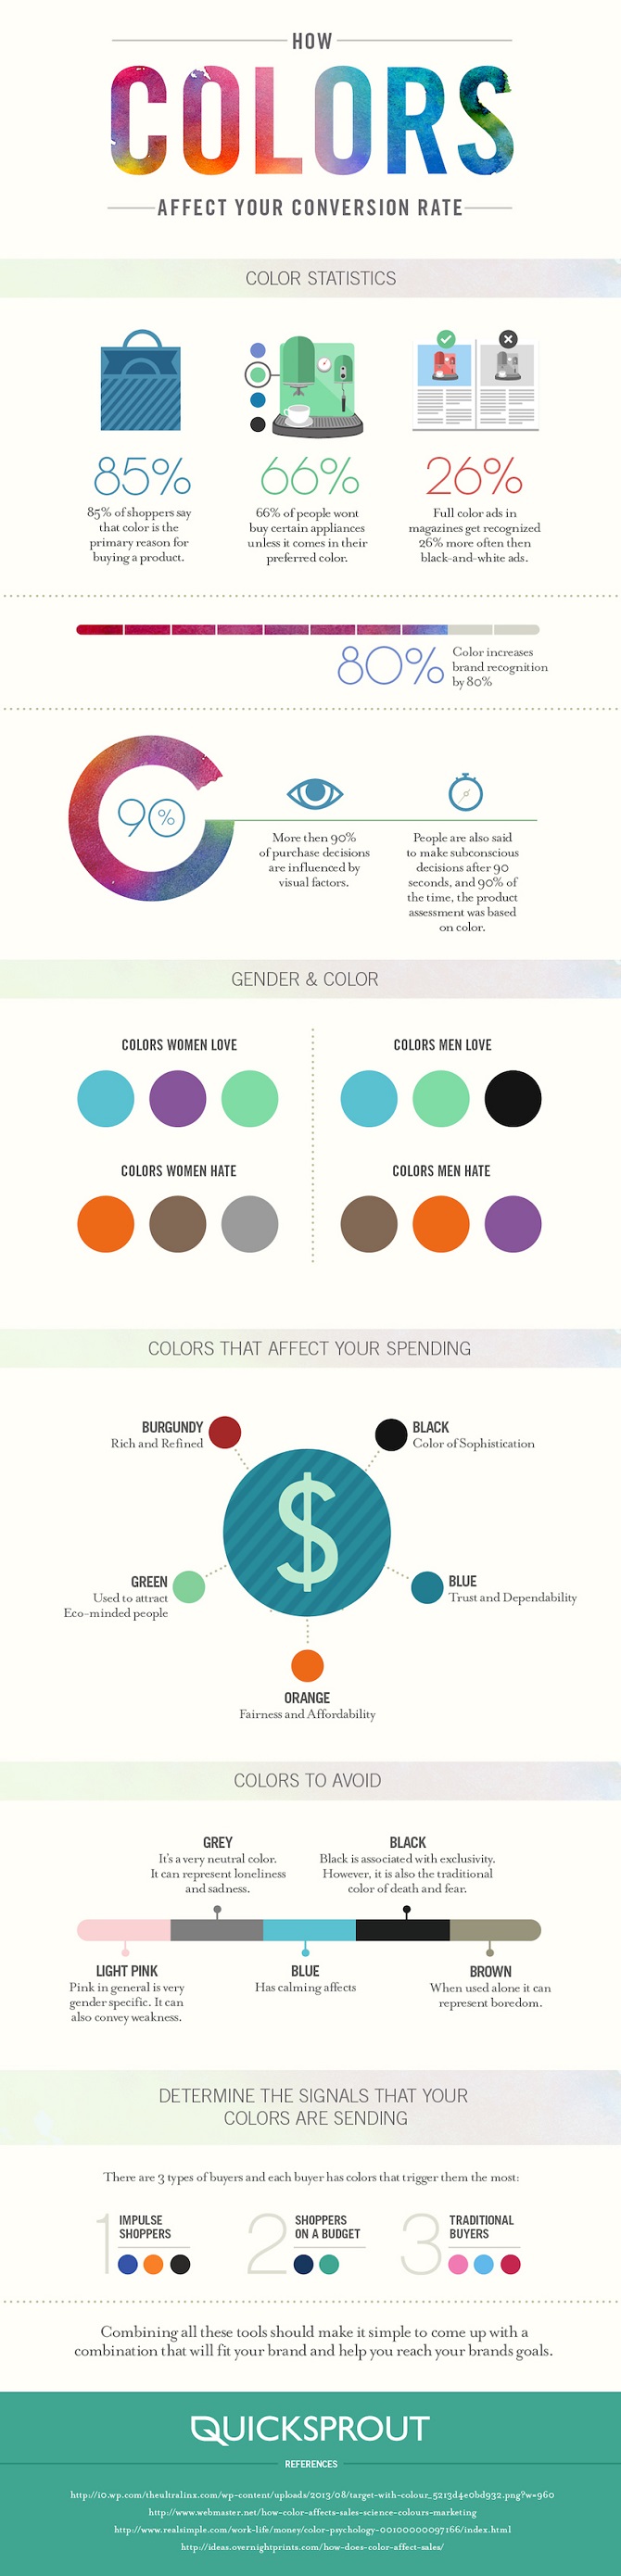 How Colors Affect Conversion Rate Marketing